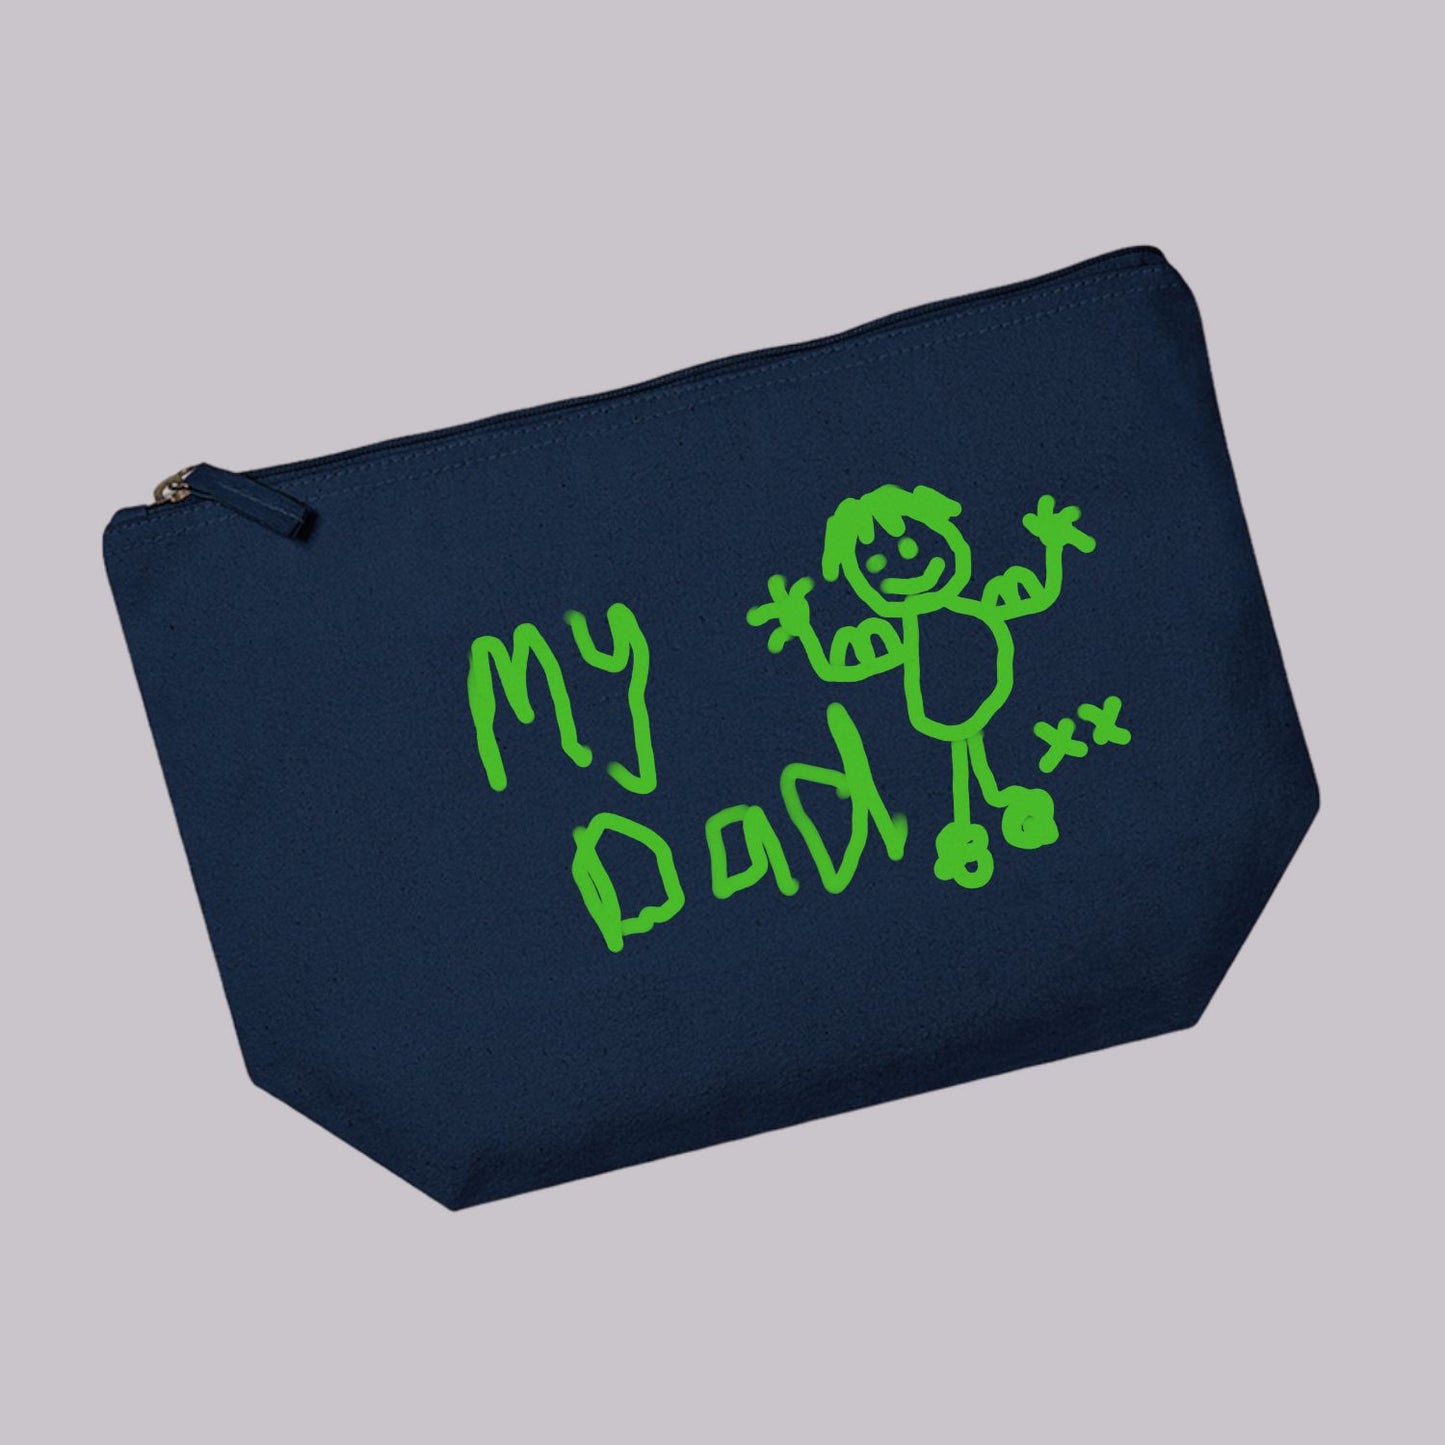 Personalised wash bag with child’s artwork